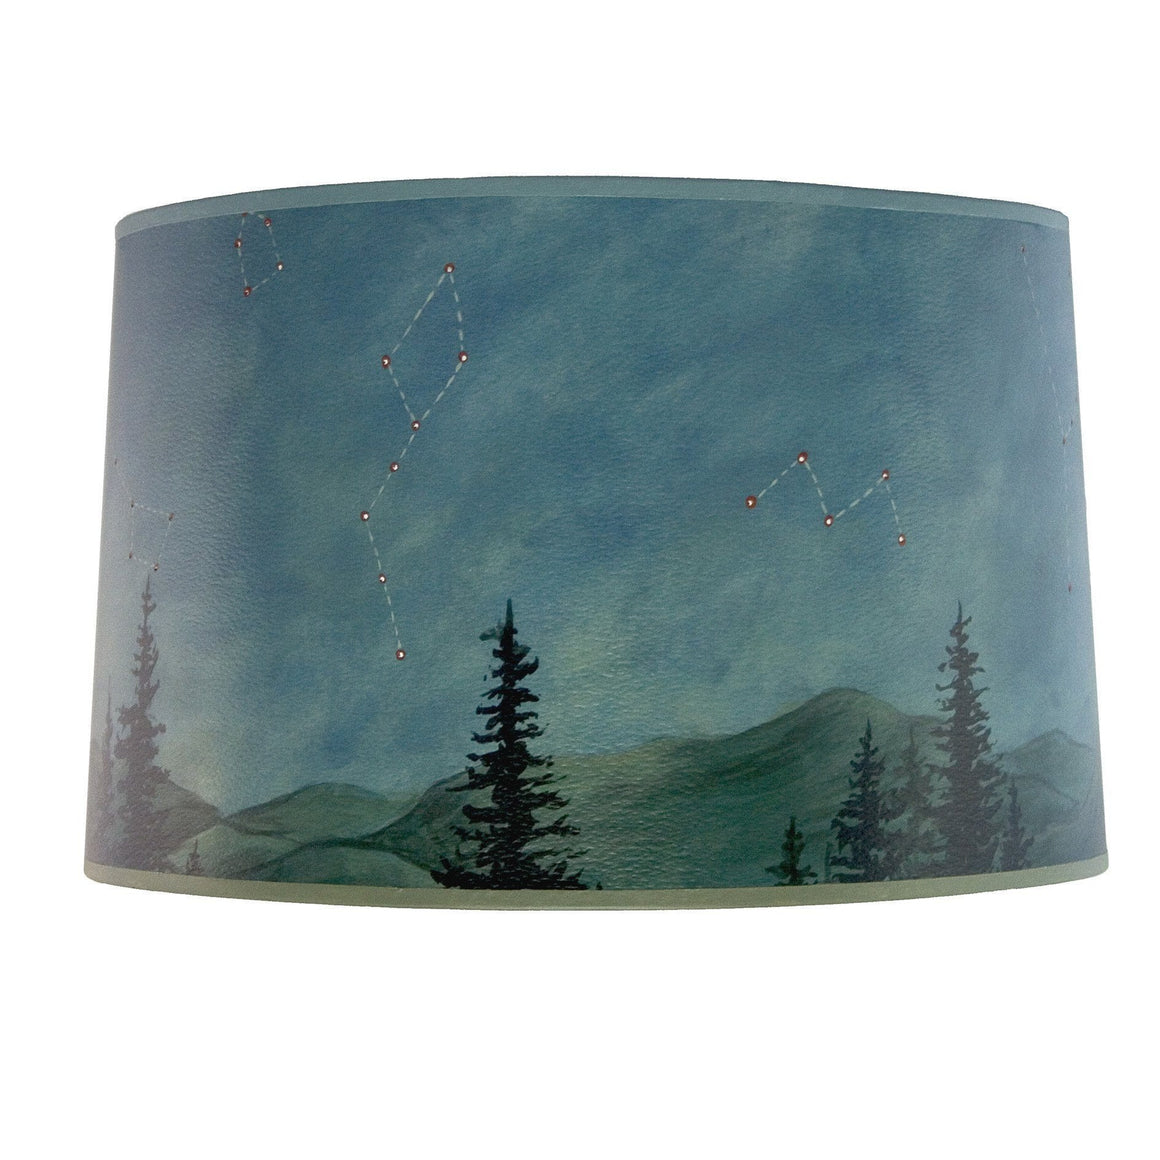 Large Drum Lamp Shade in Midnight Sky